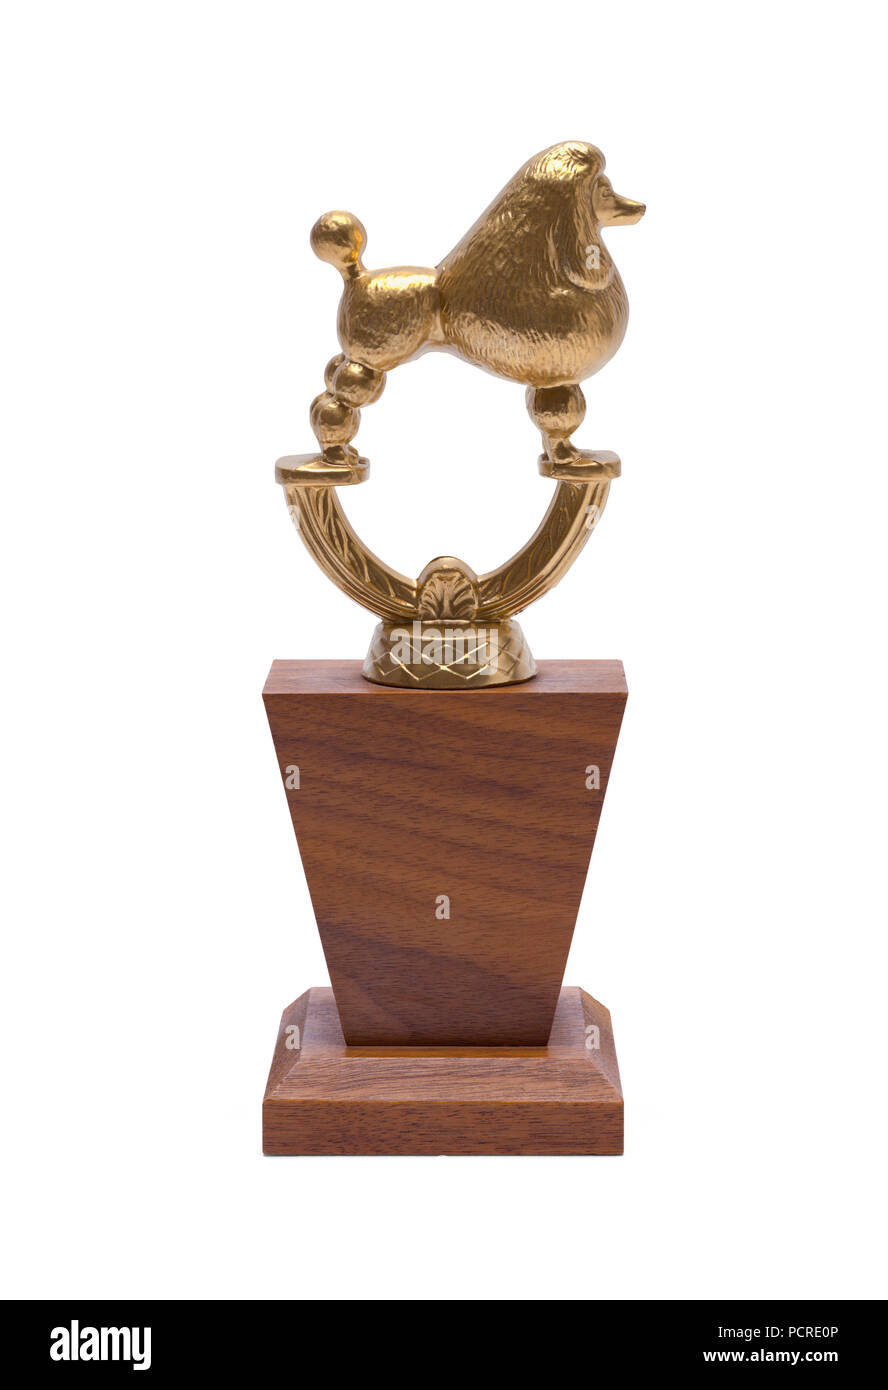 Gold Dog Trophy Isolated on a White Background. Stock Photo